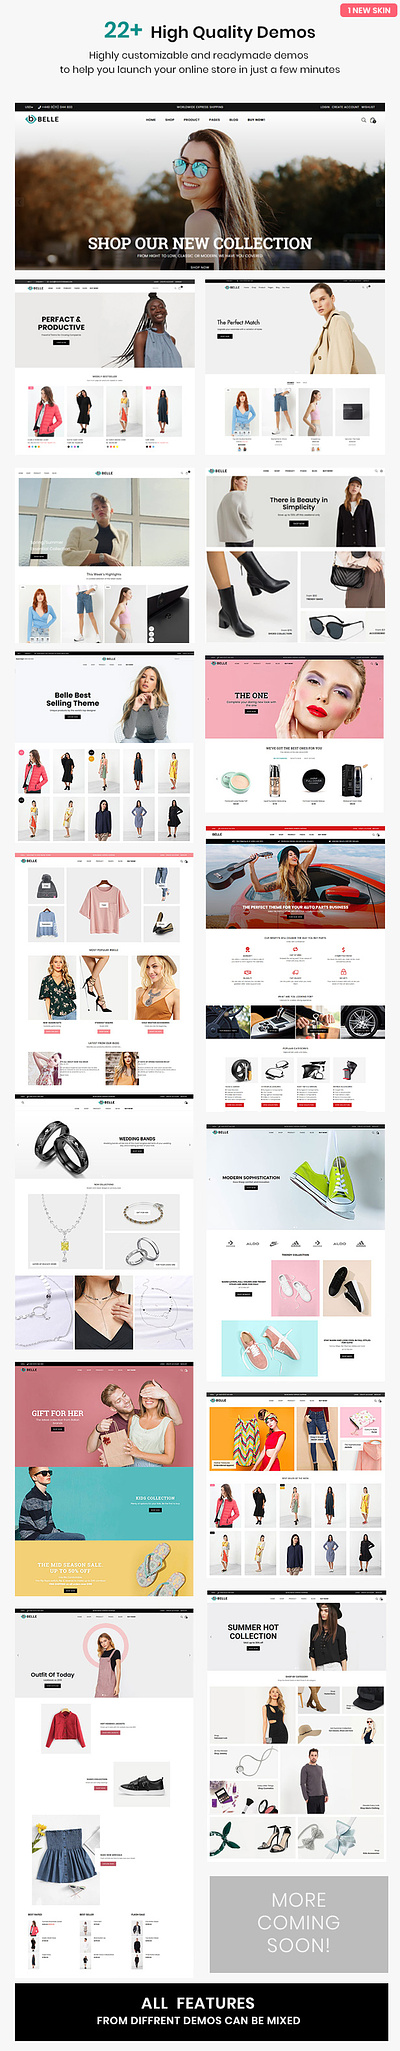 Belle - Clothing and Fashion Shopify Theme OS 2.0 template